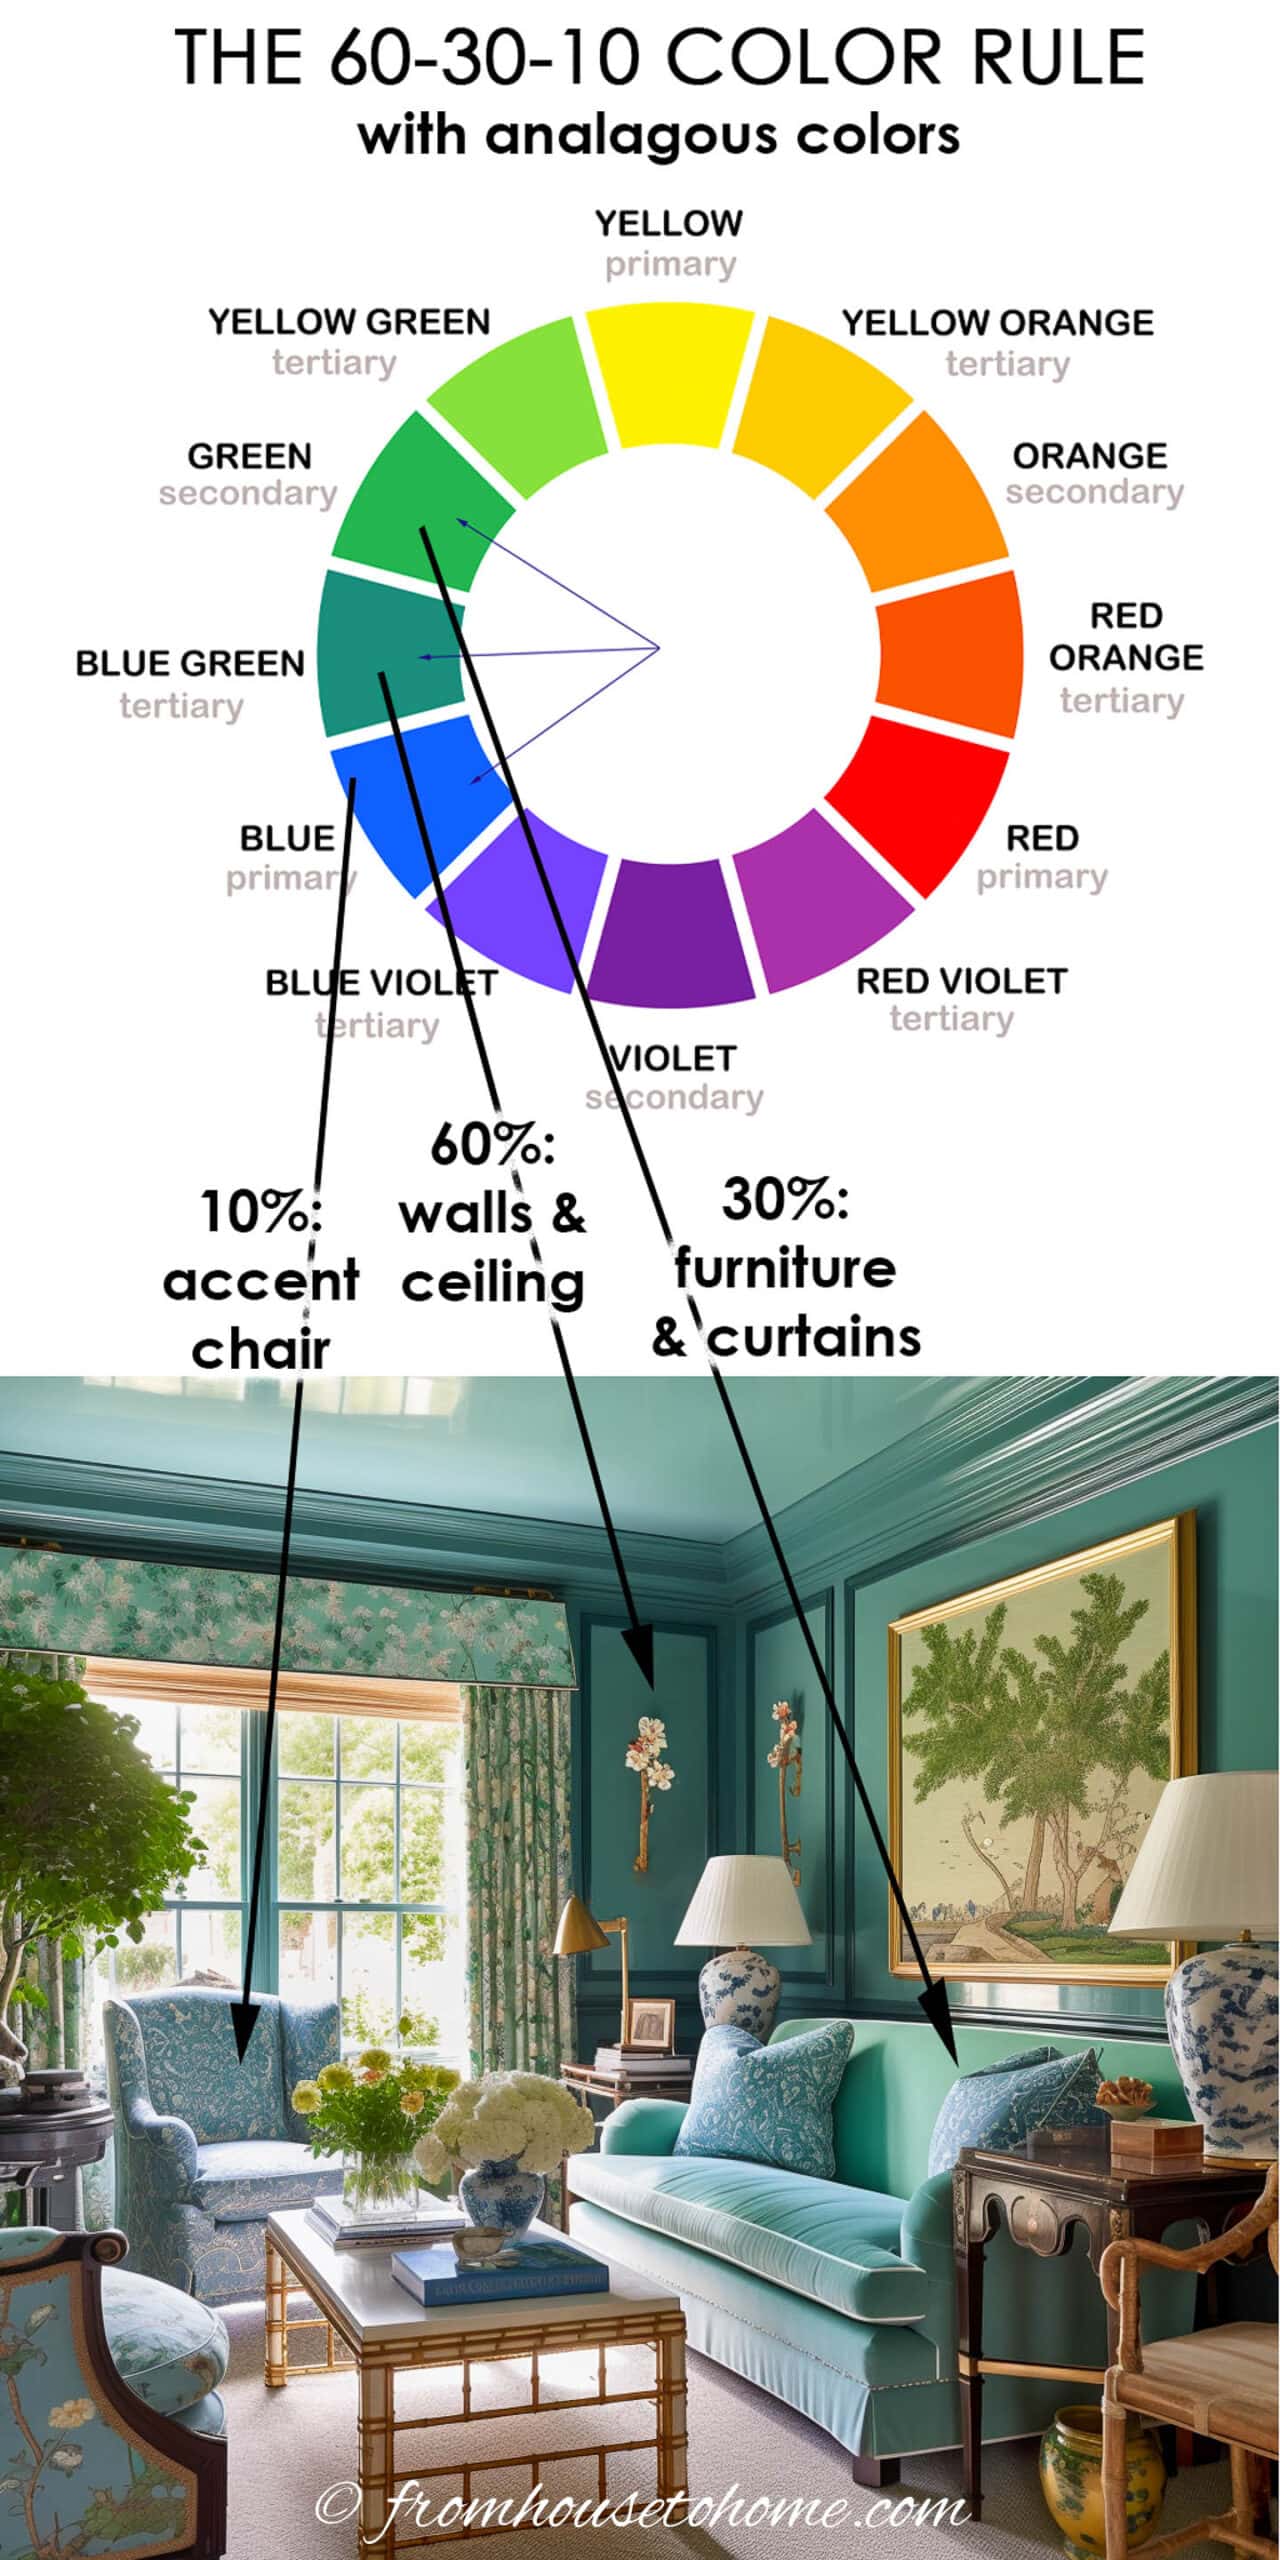 The 60 30 10 decorating rule using analagous colors in a blue and green living room